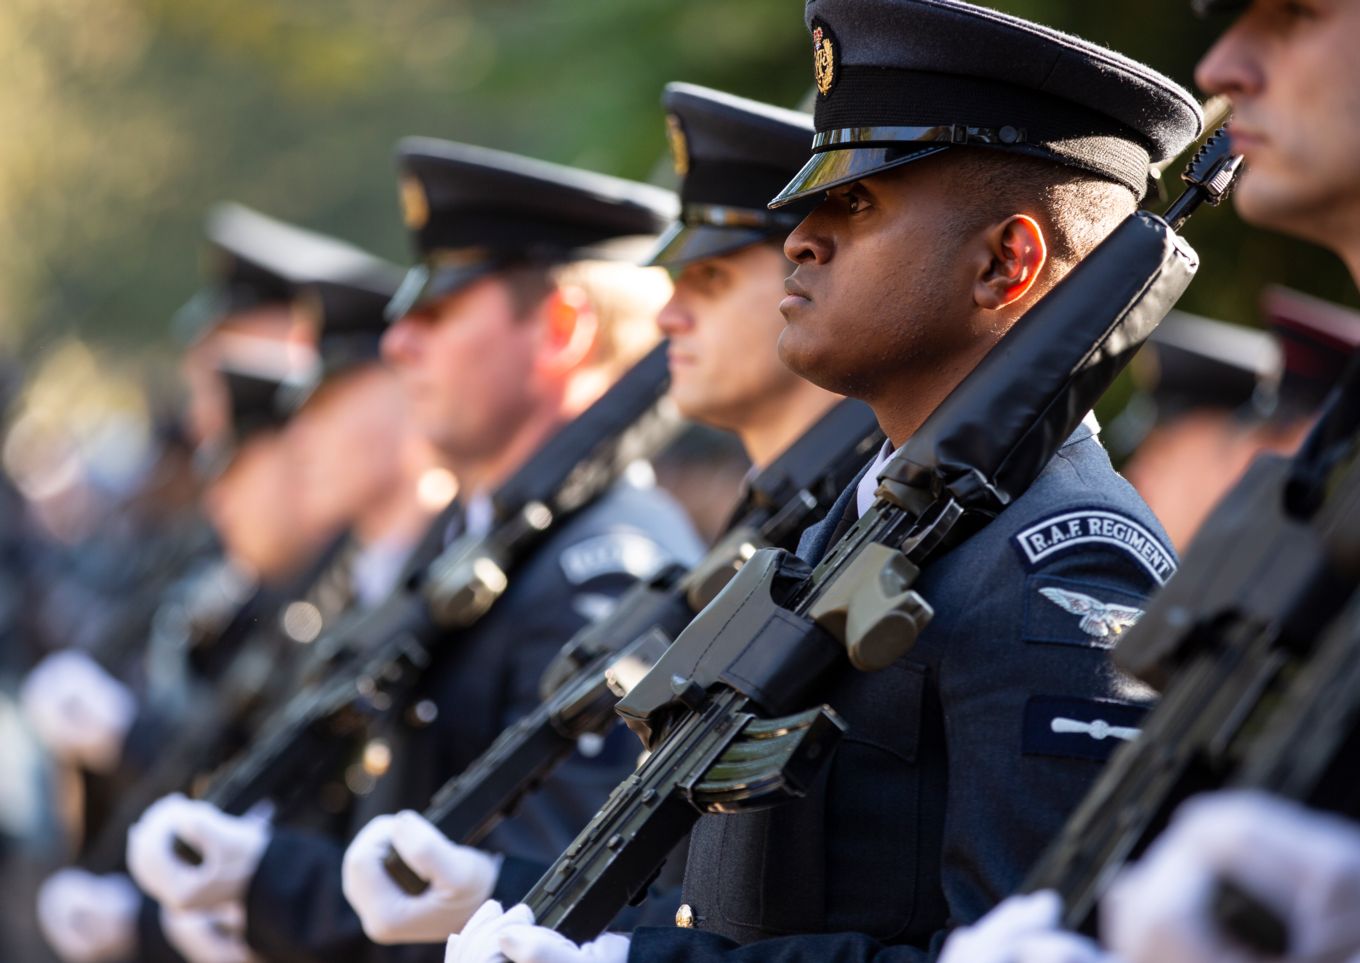 Image shows RAF Regiment personnel during a parade.